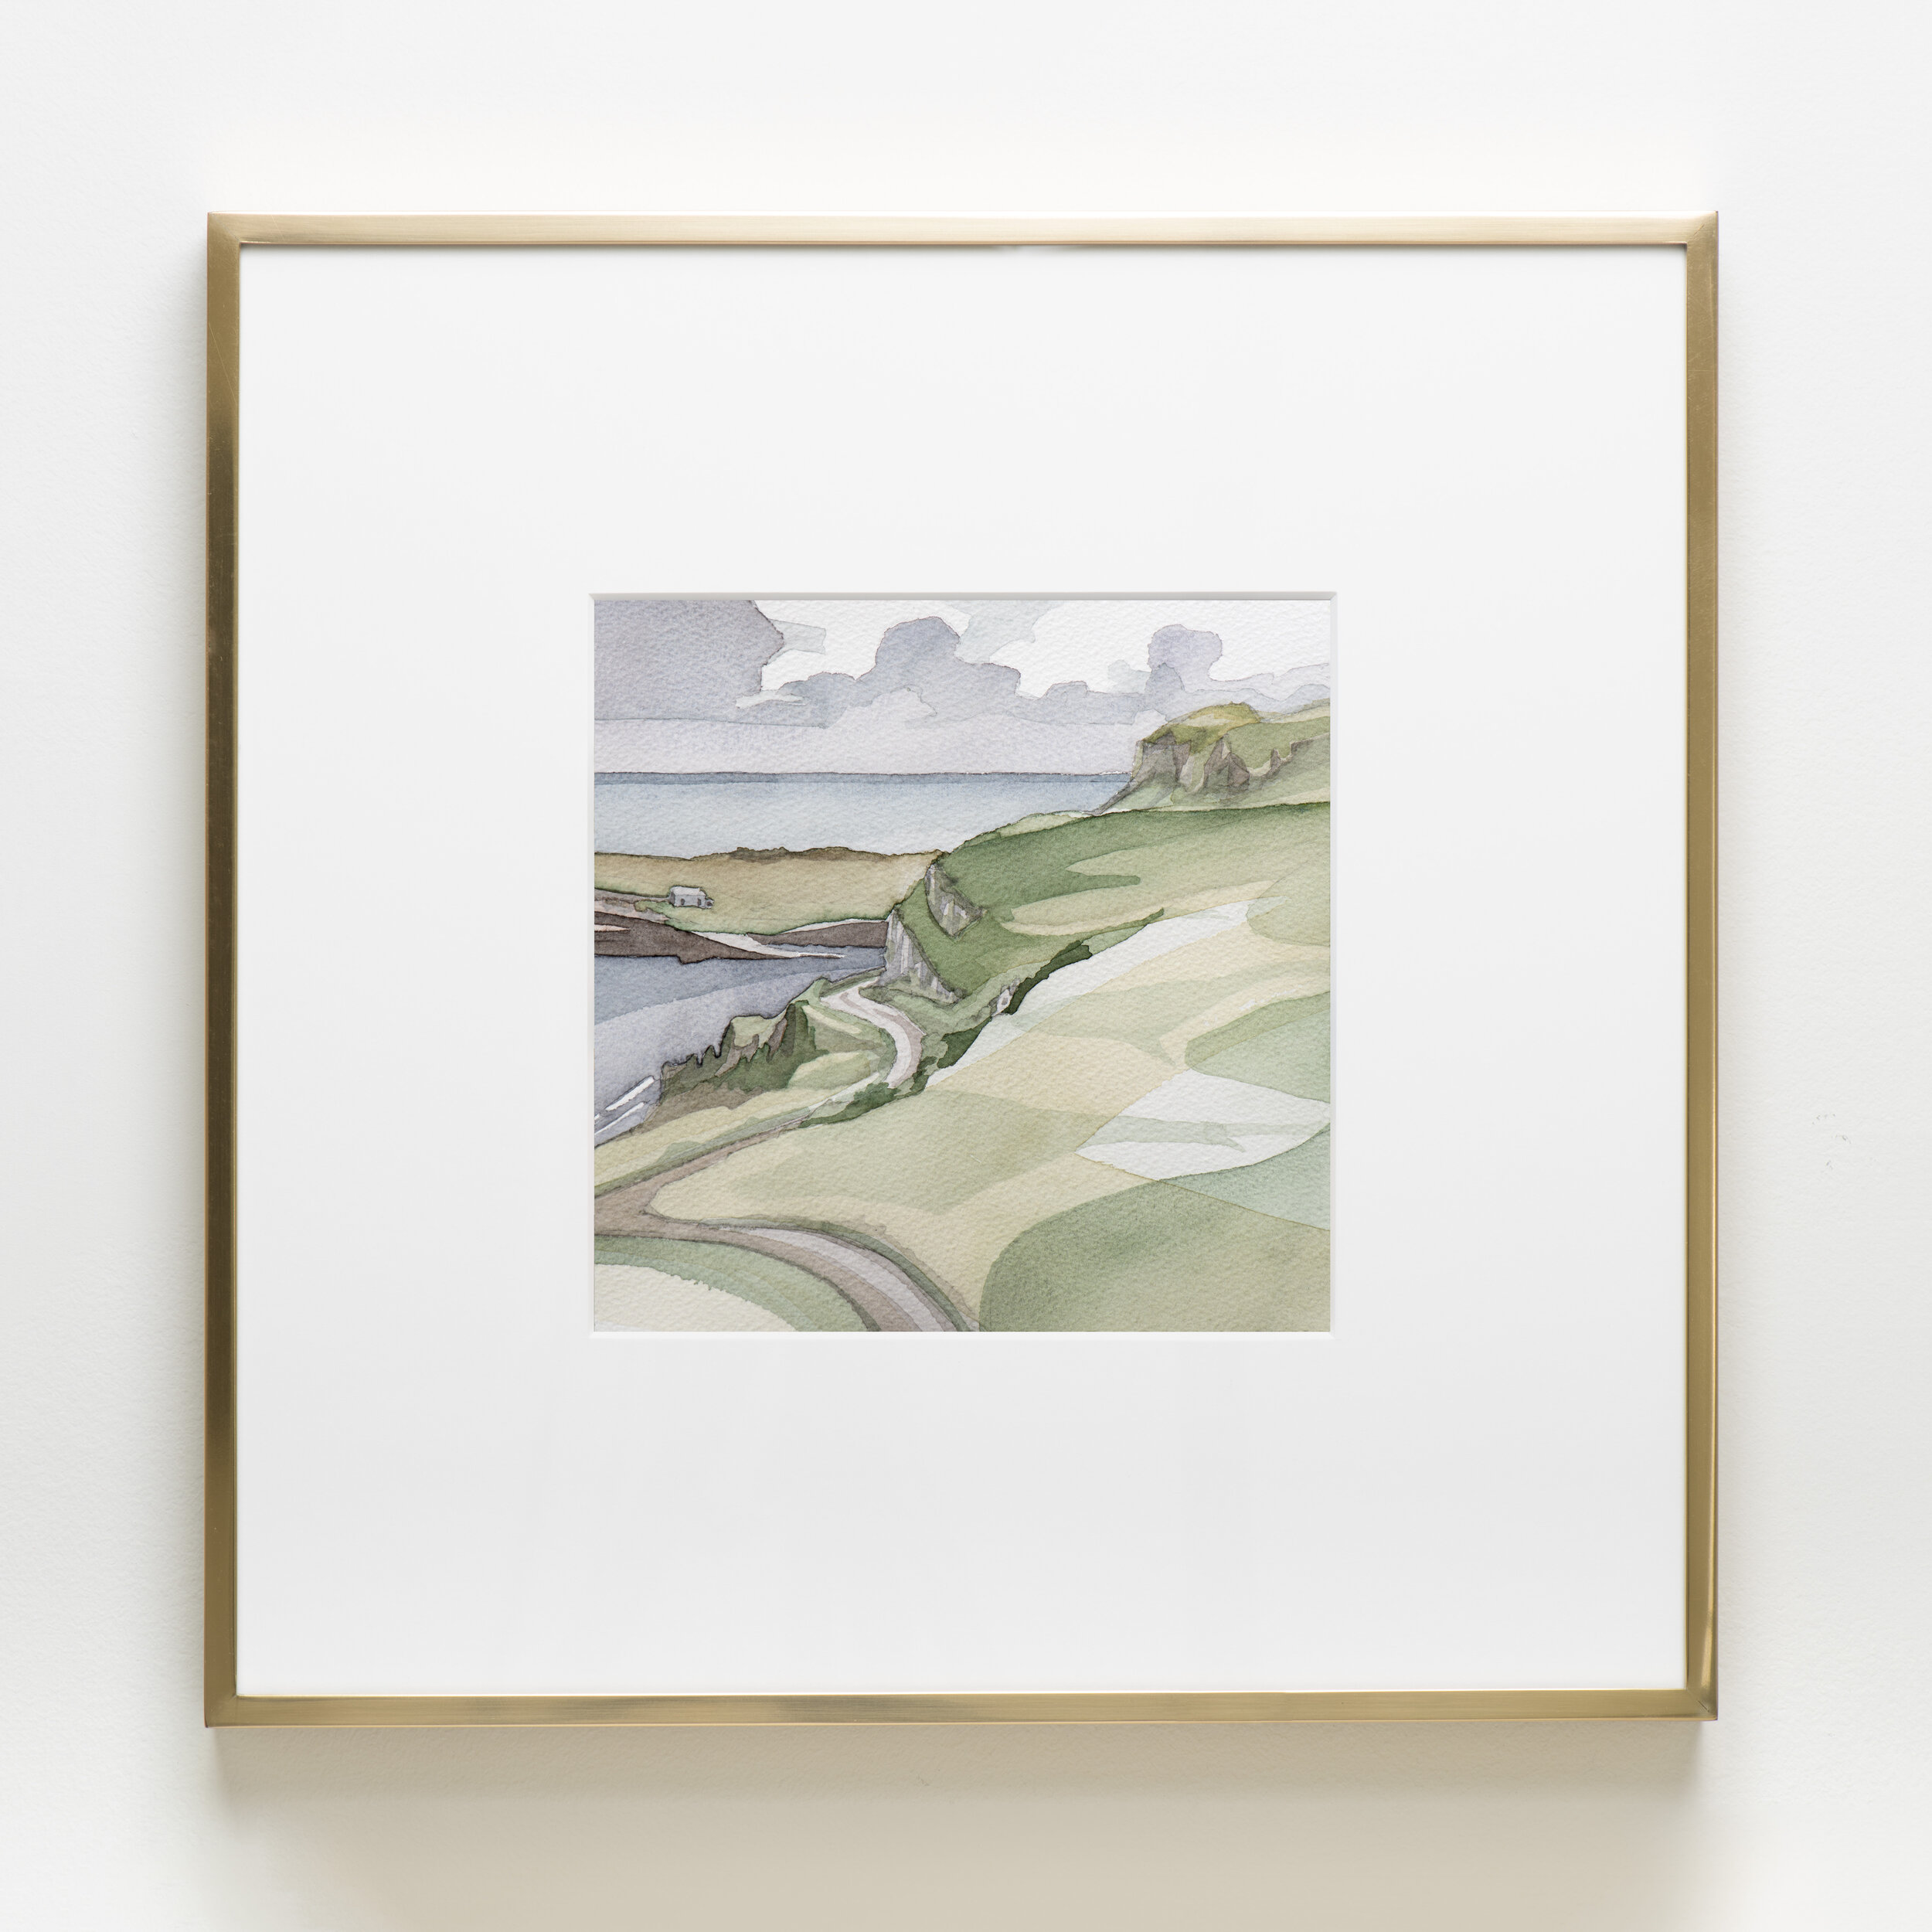   Staffin Bay , 2018 Watercolor on paper 16 1/4 x 16 1/4 x 1 1/4 inches 